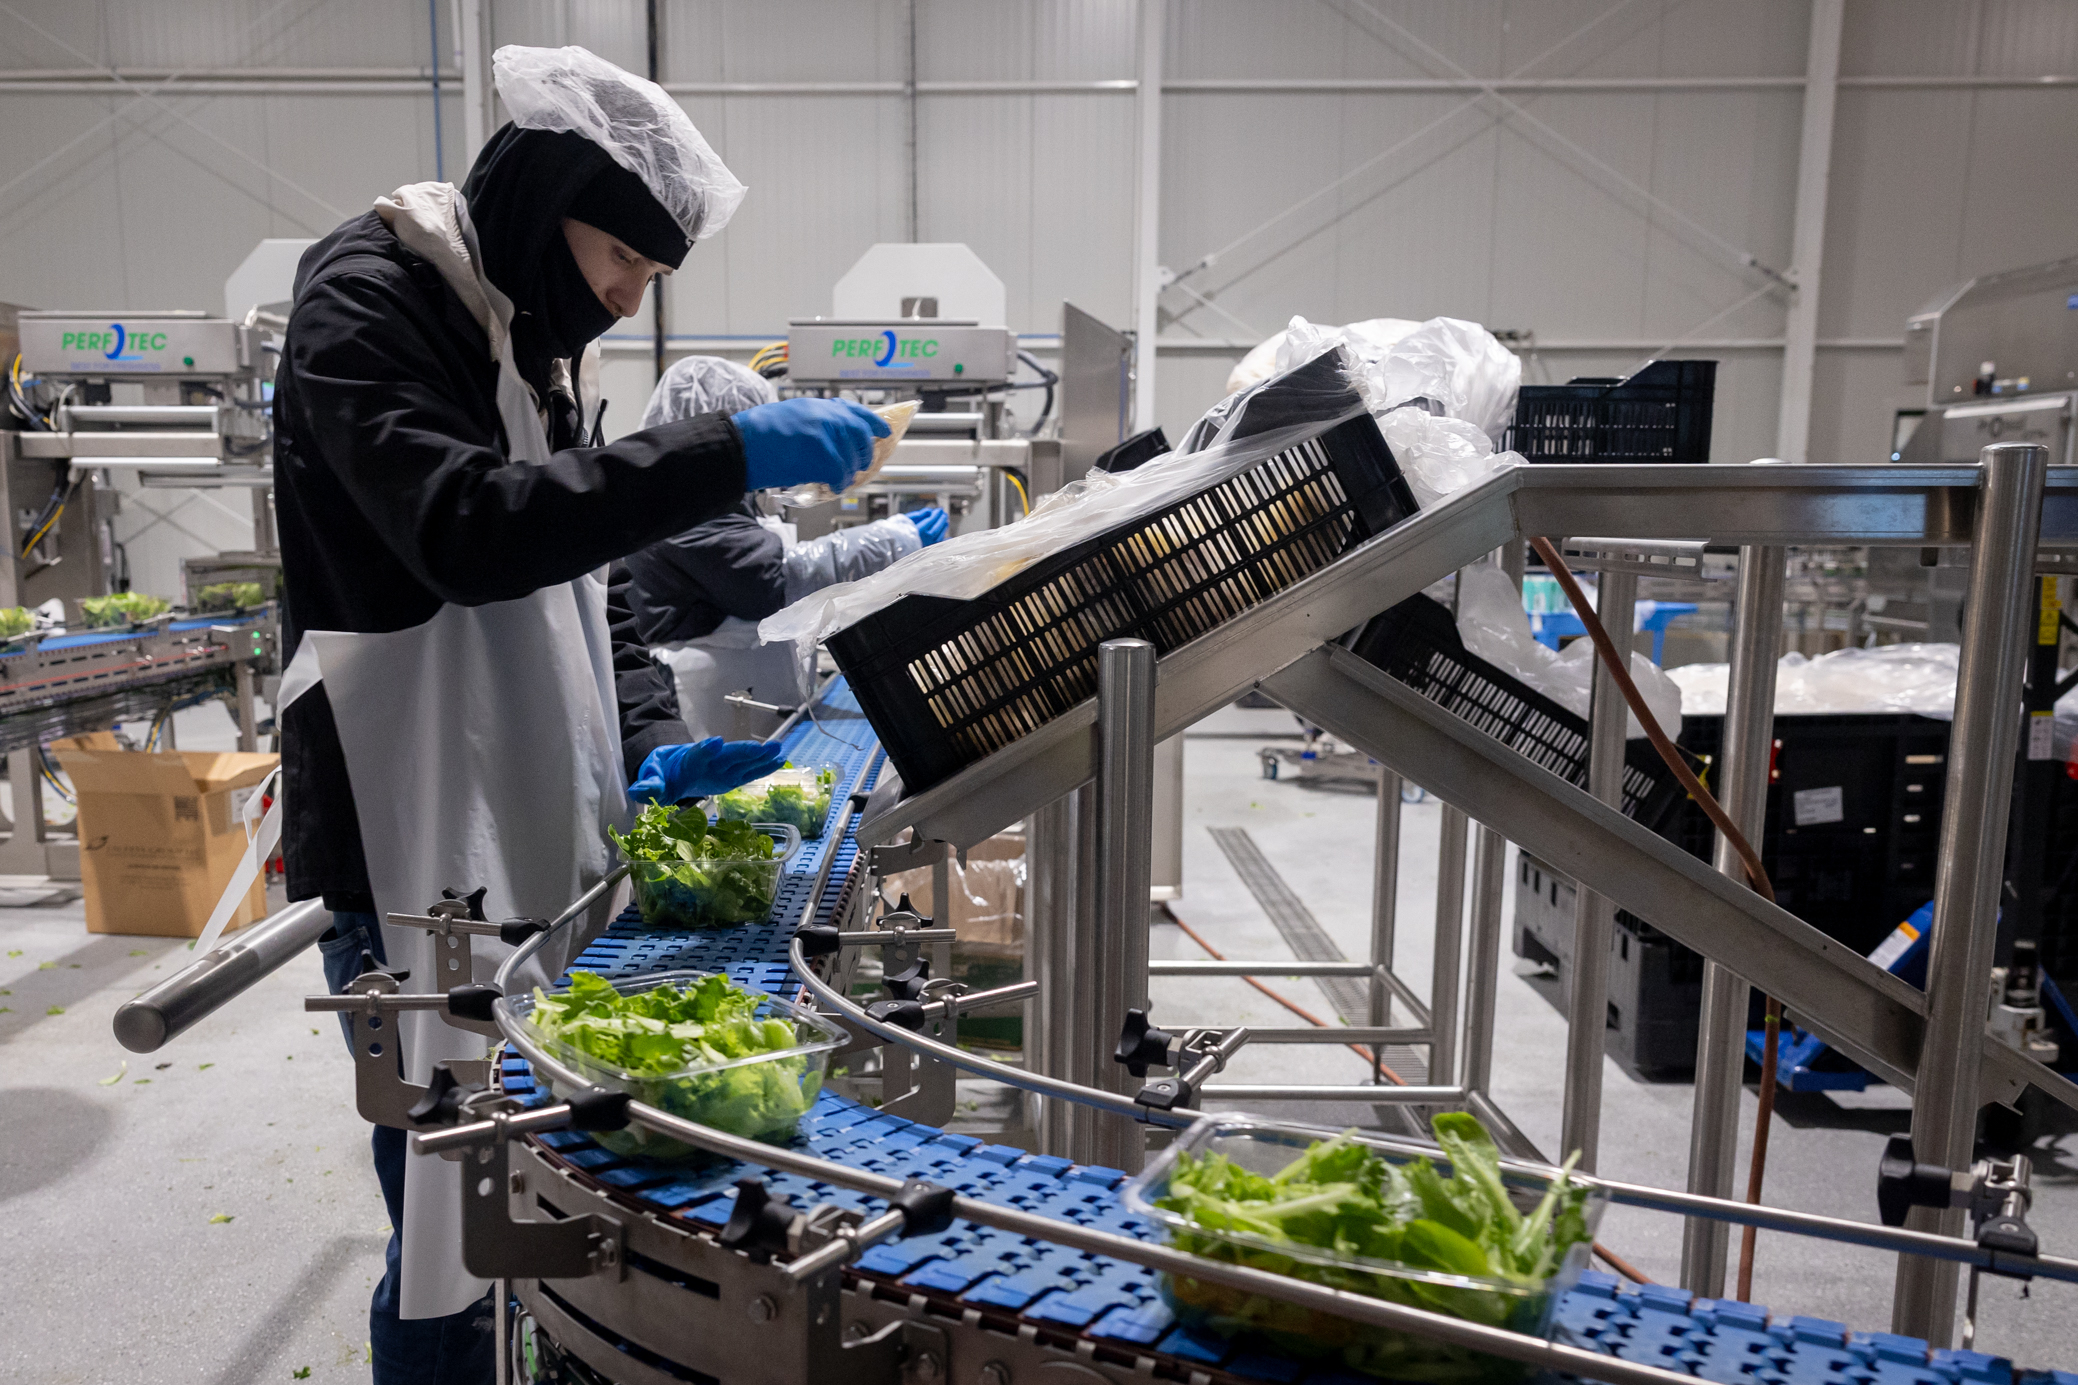 A worker wearing hair nets, face coverings and gloves handles salad kits as trays of lettuce pass in front of him on a conveyor belt.